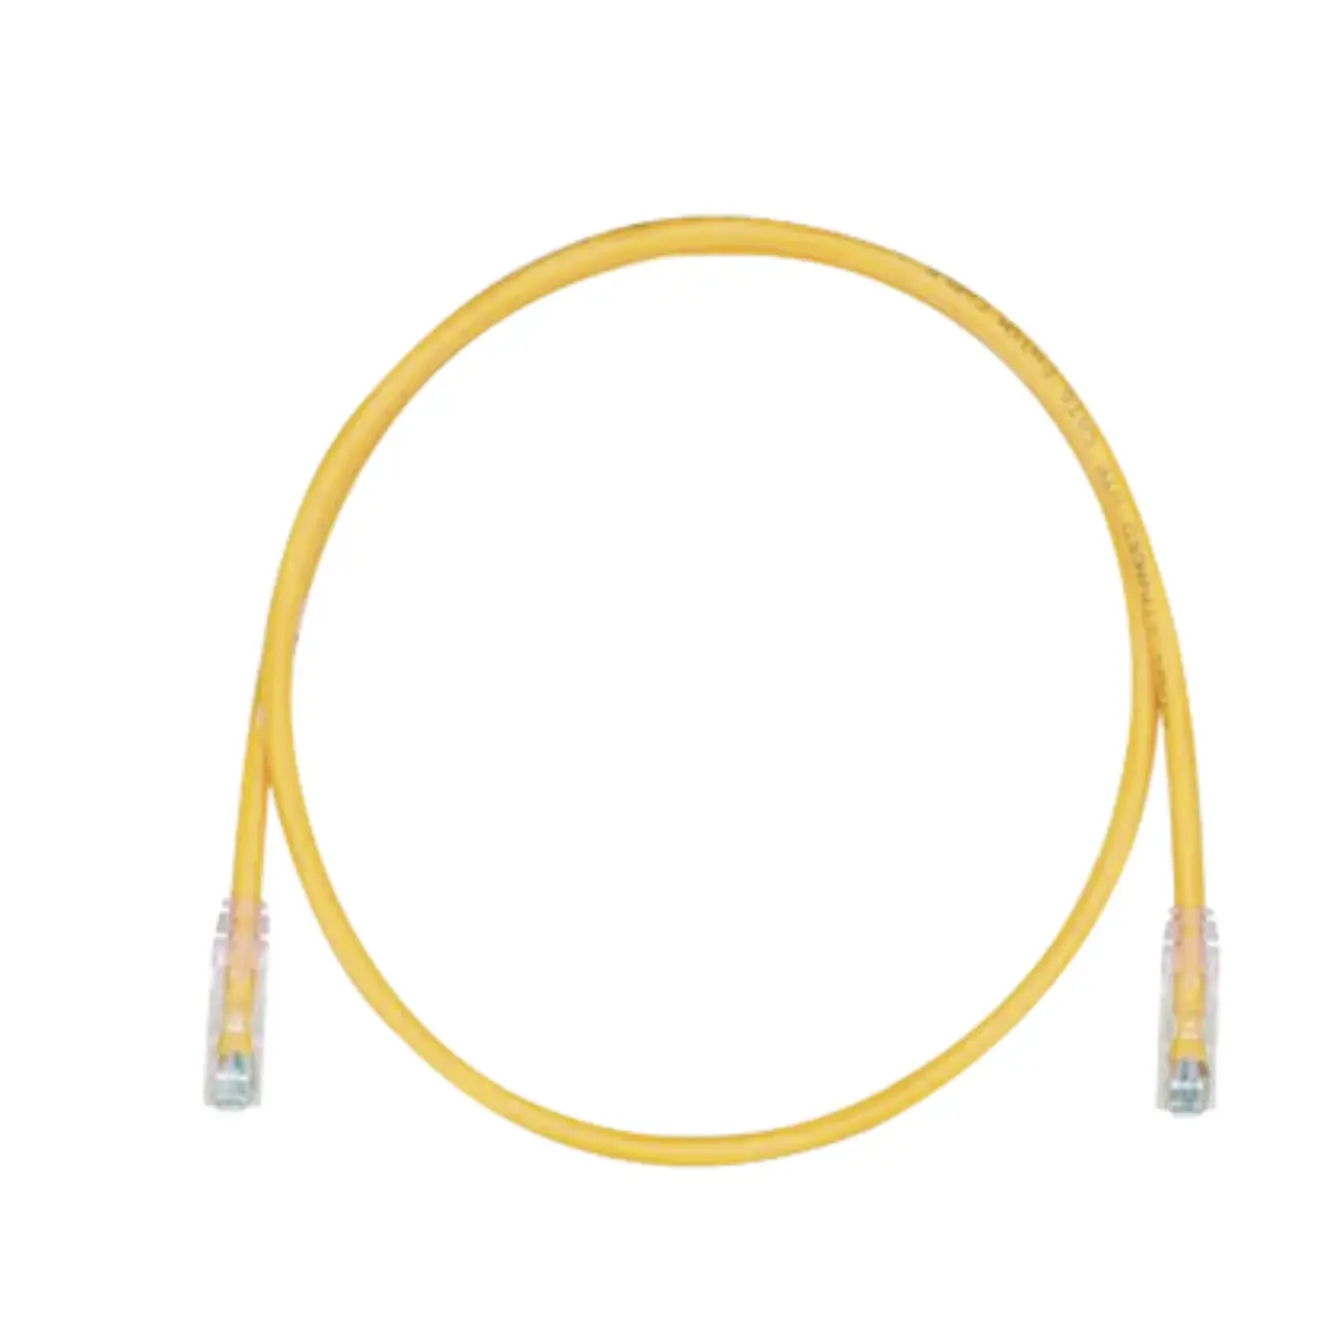 Cable de Parcheo TX6 UTPSP7YLY